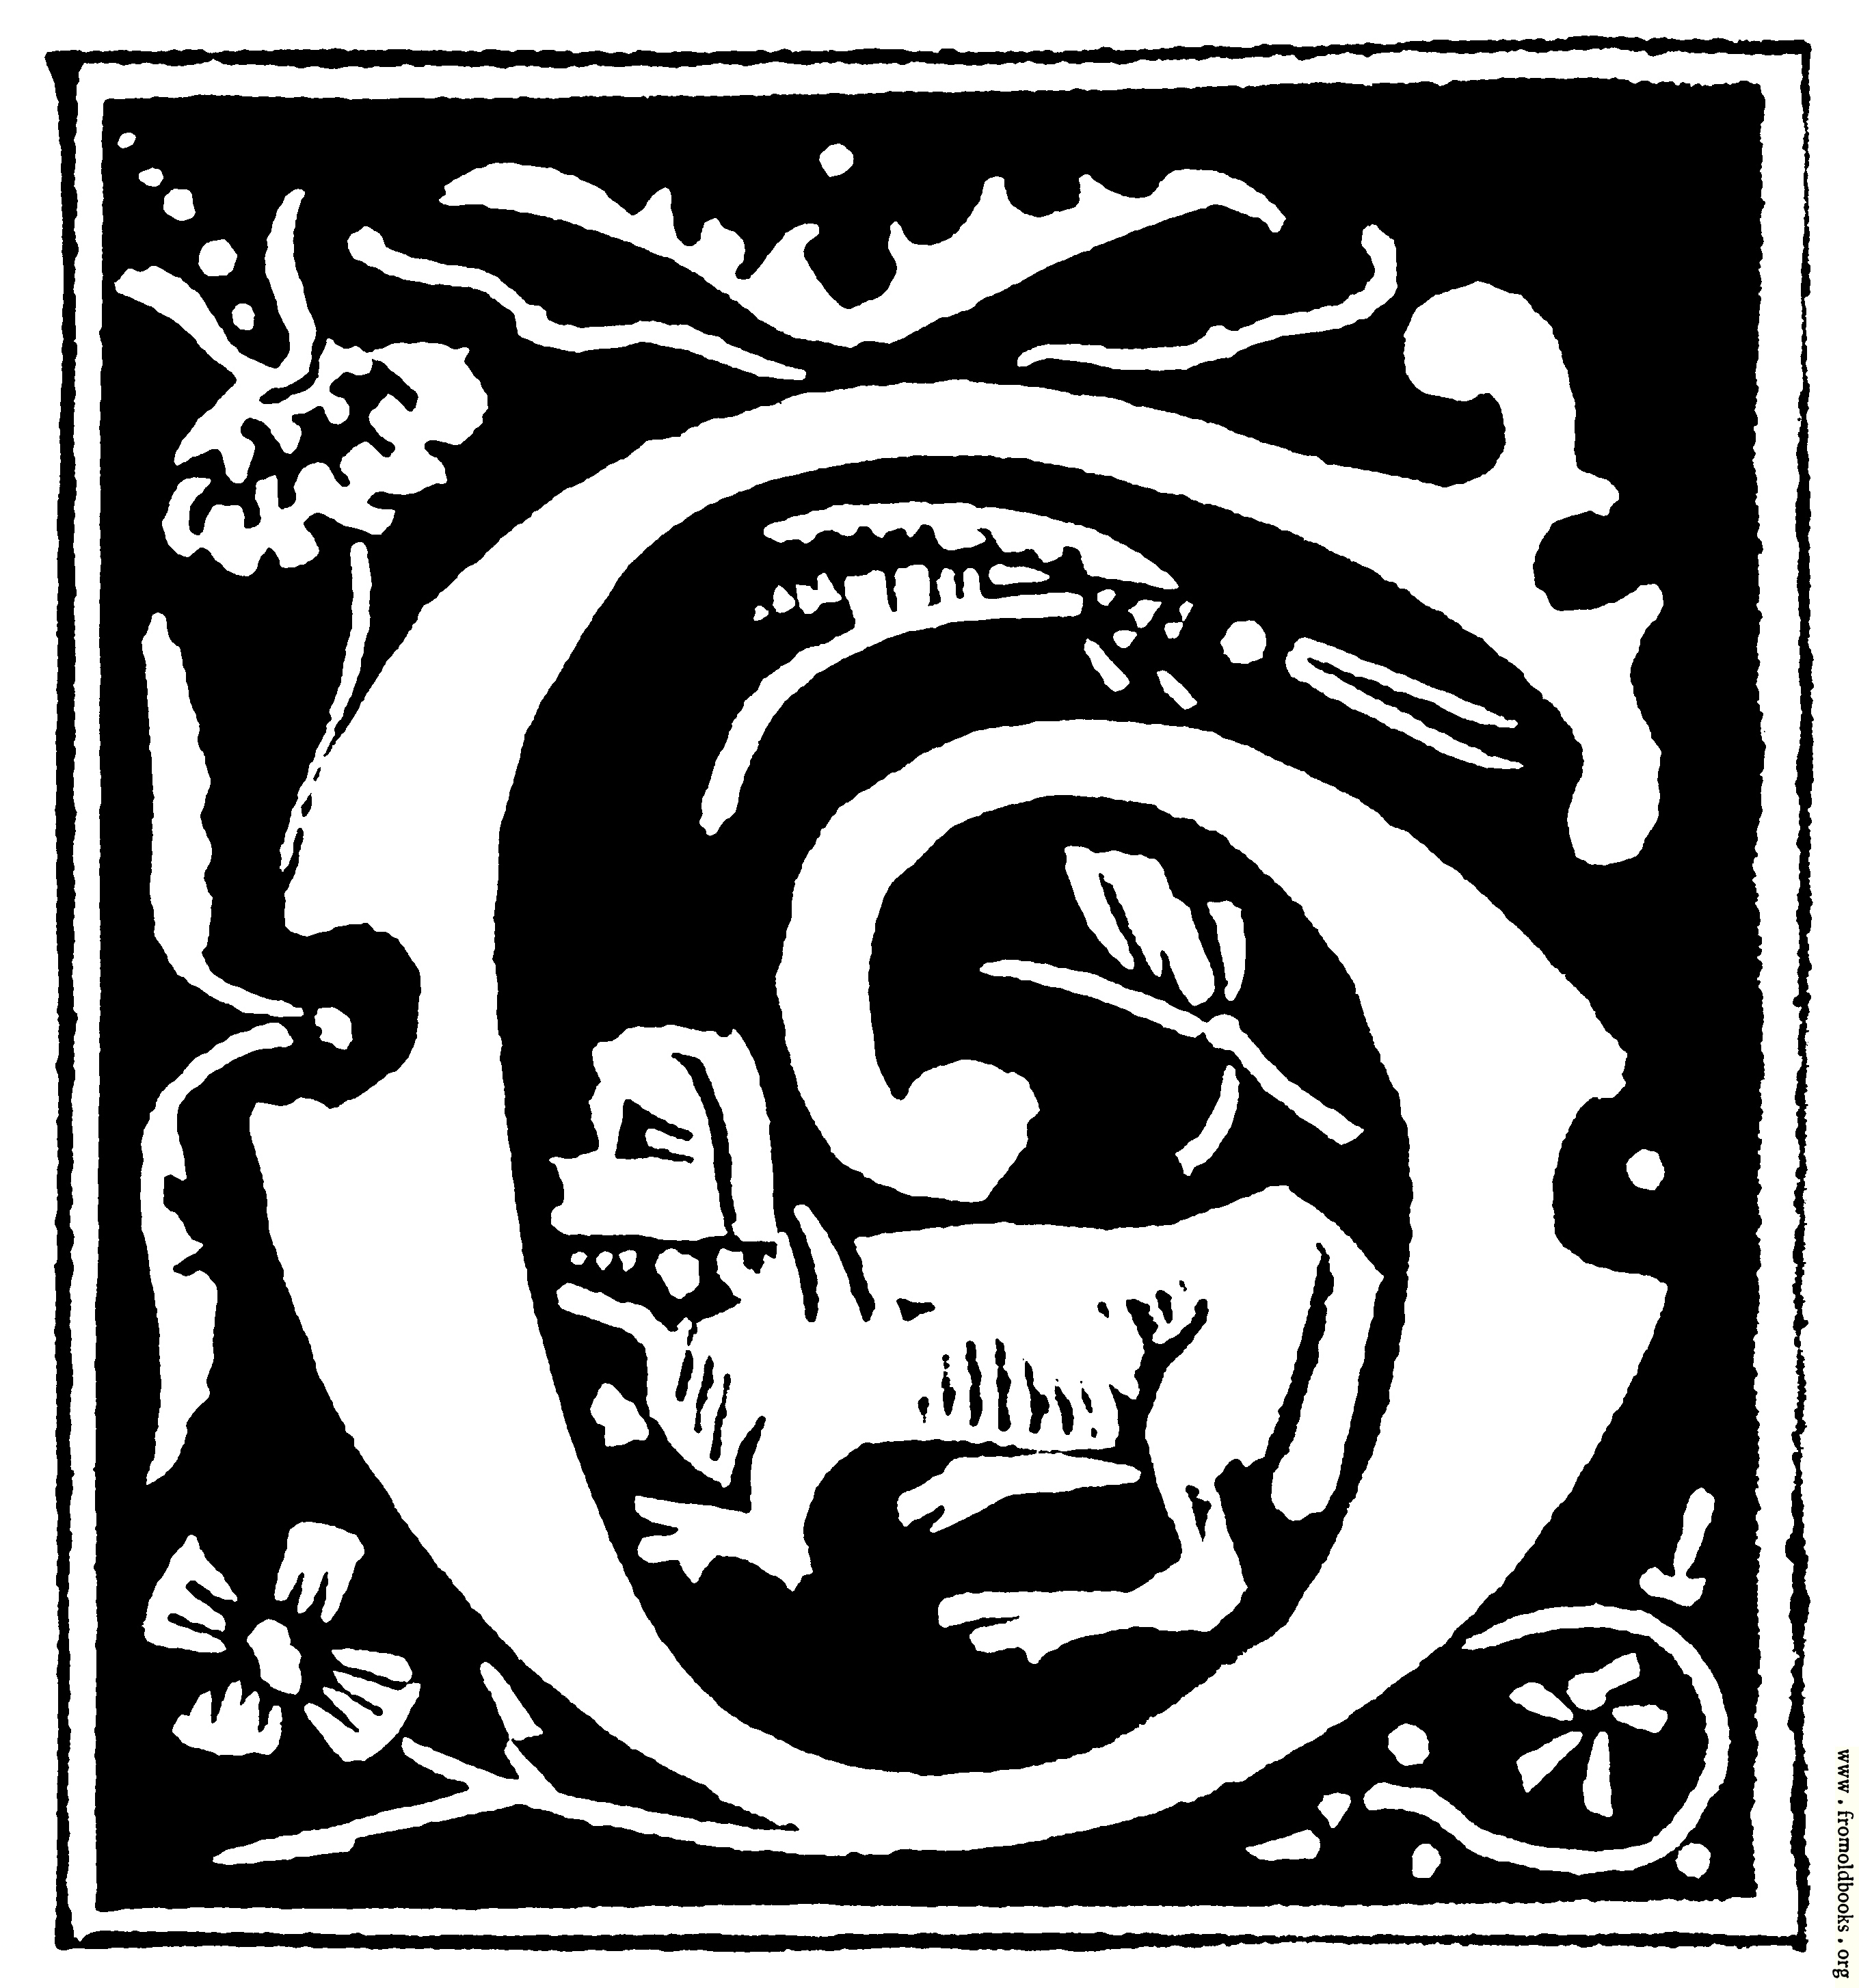 [Picture: Decorative initial letter “G” from 16th Century]